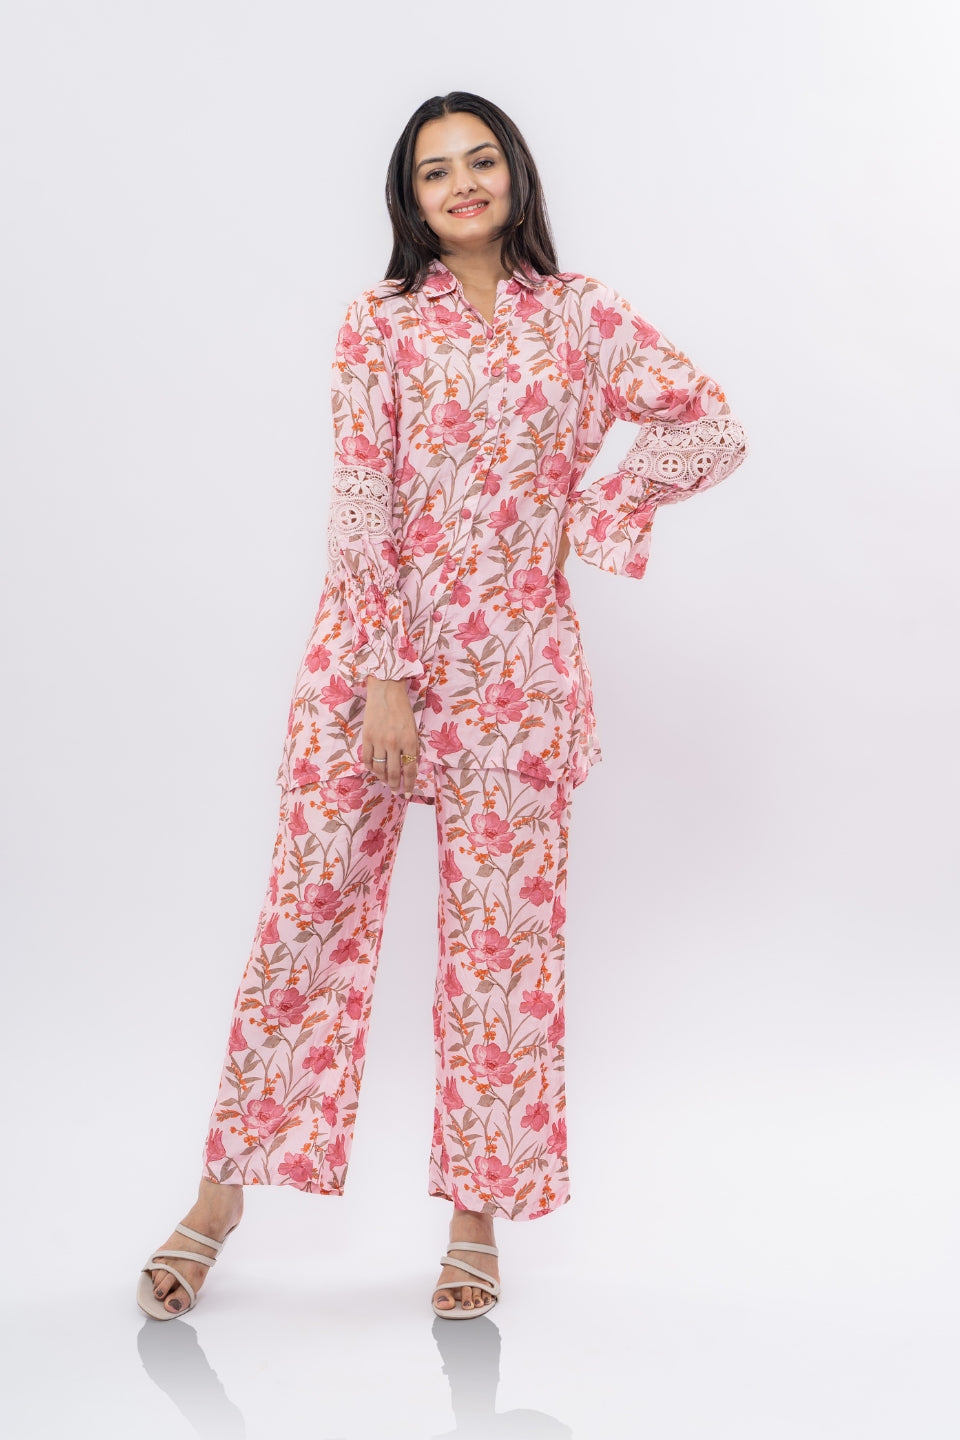 Ekisha's women muslin printed pink floral co-ord set, front view